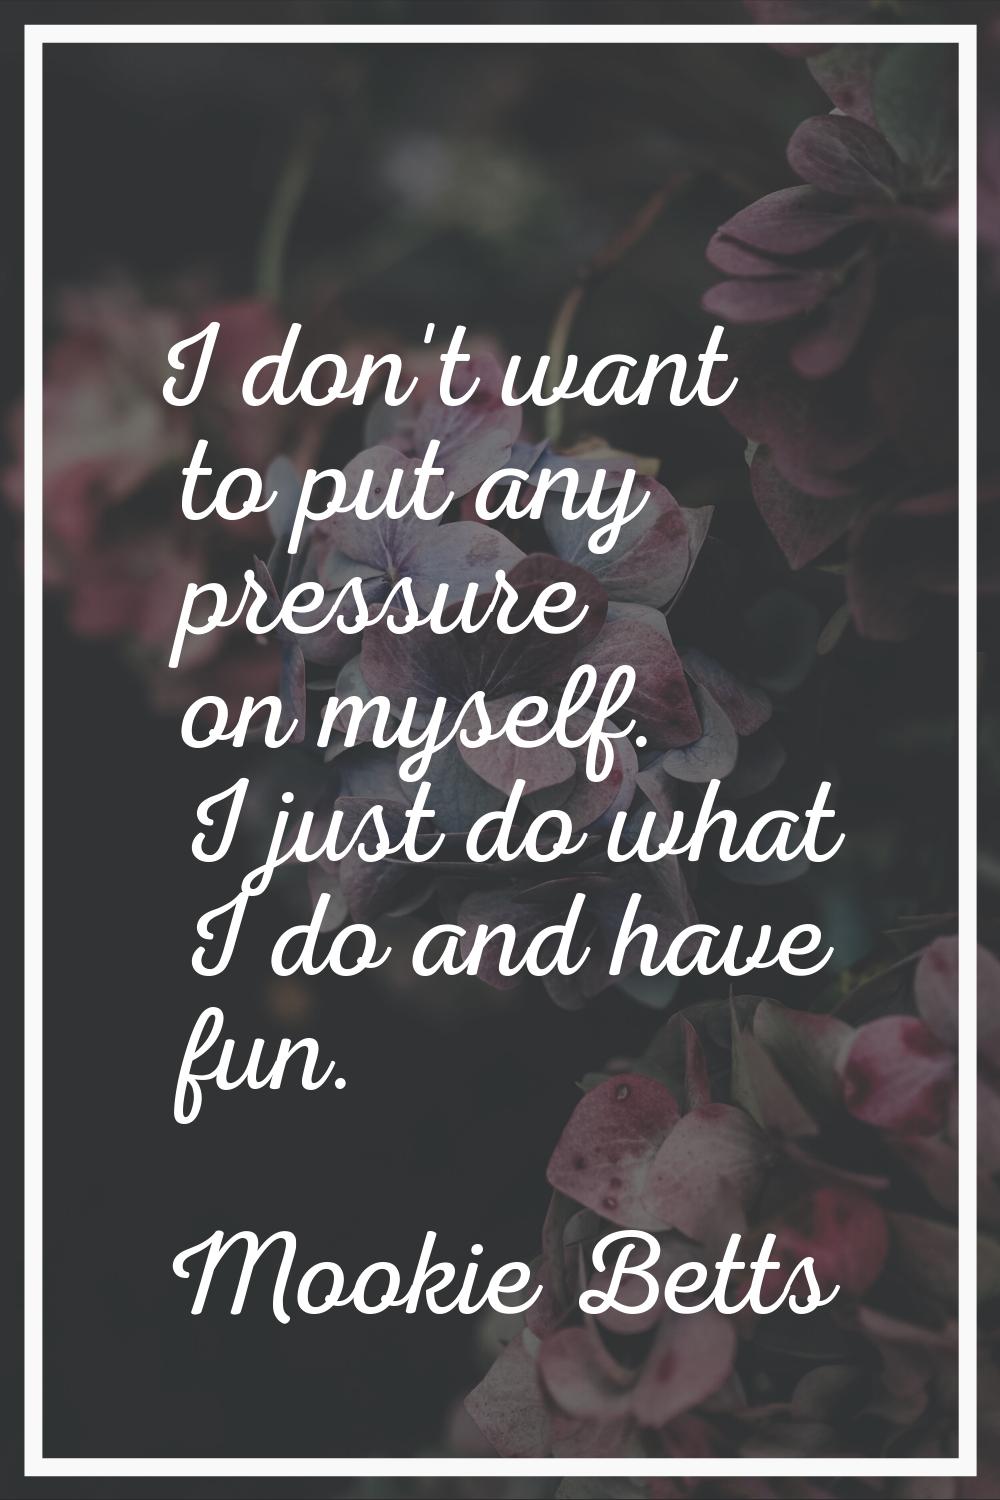 I don't want to put any pressure on myself. I just do what I do and have fun.